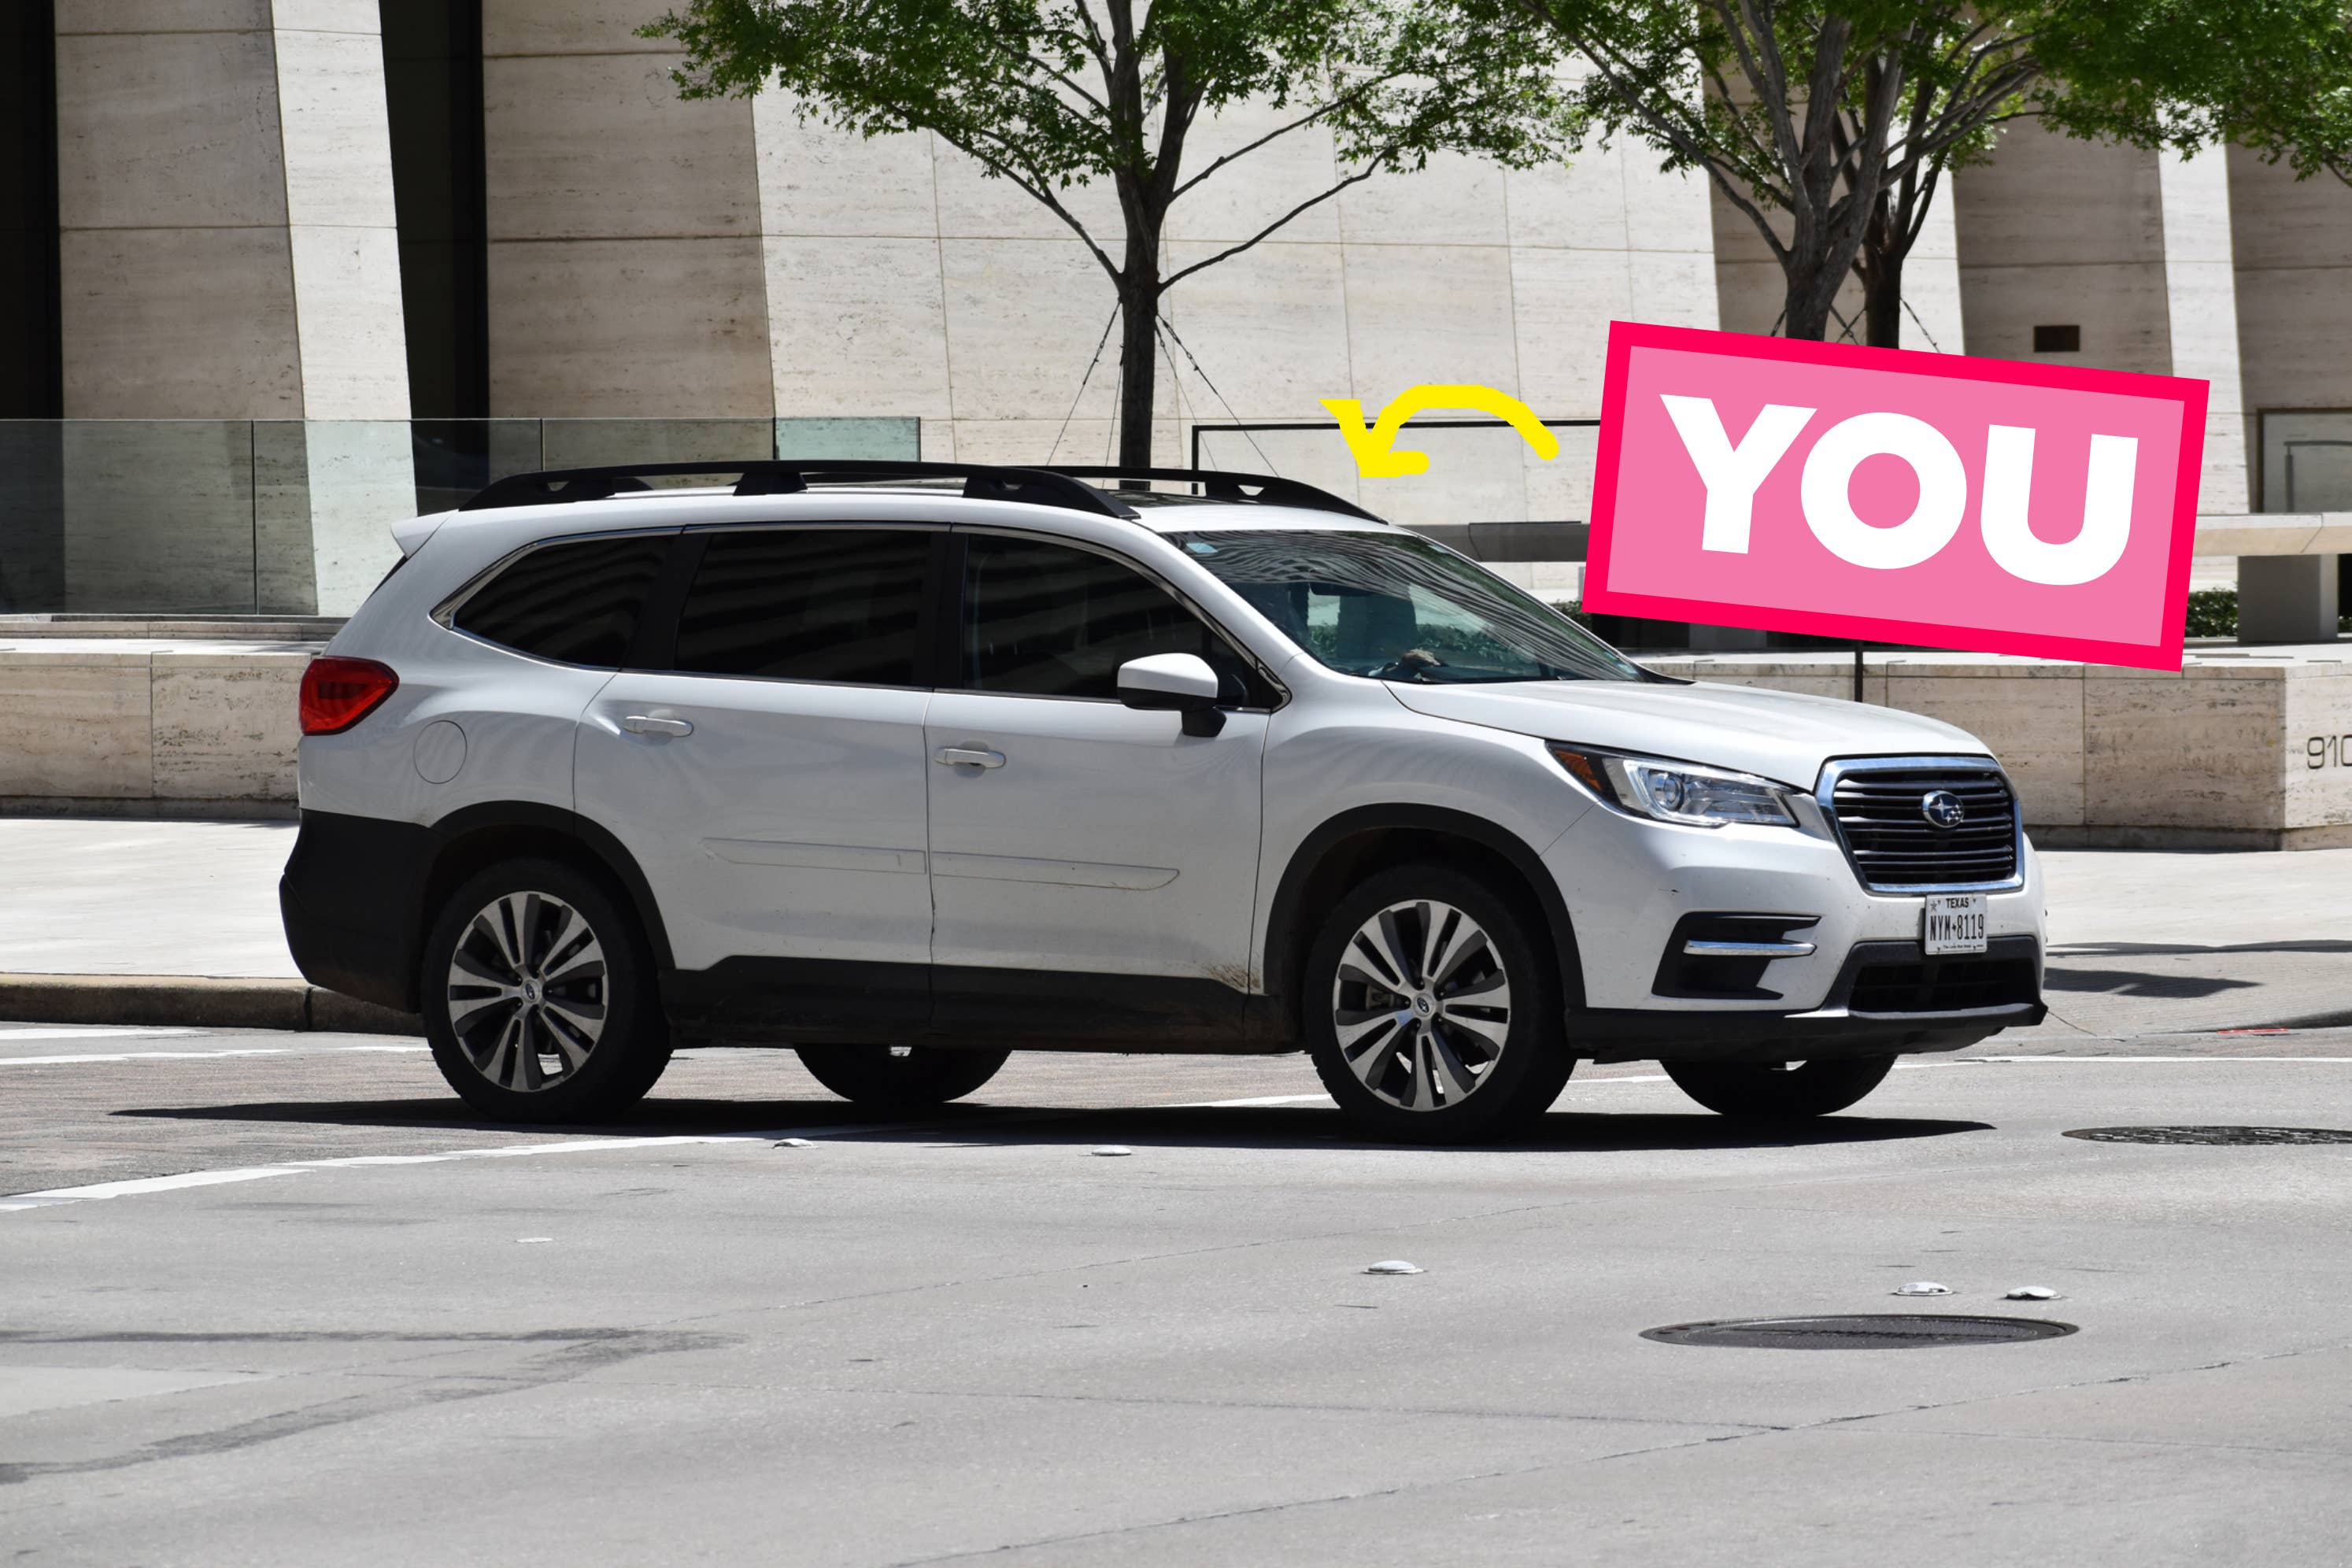 Captioned image of a white SUV on a city street with a pink sign and yellow arrow above pointing to the car, containing the text "YOU"